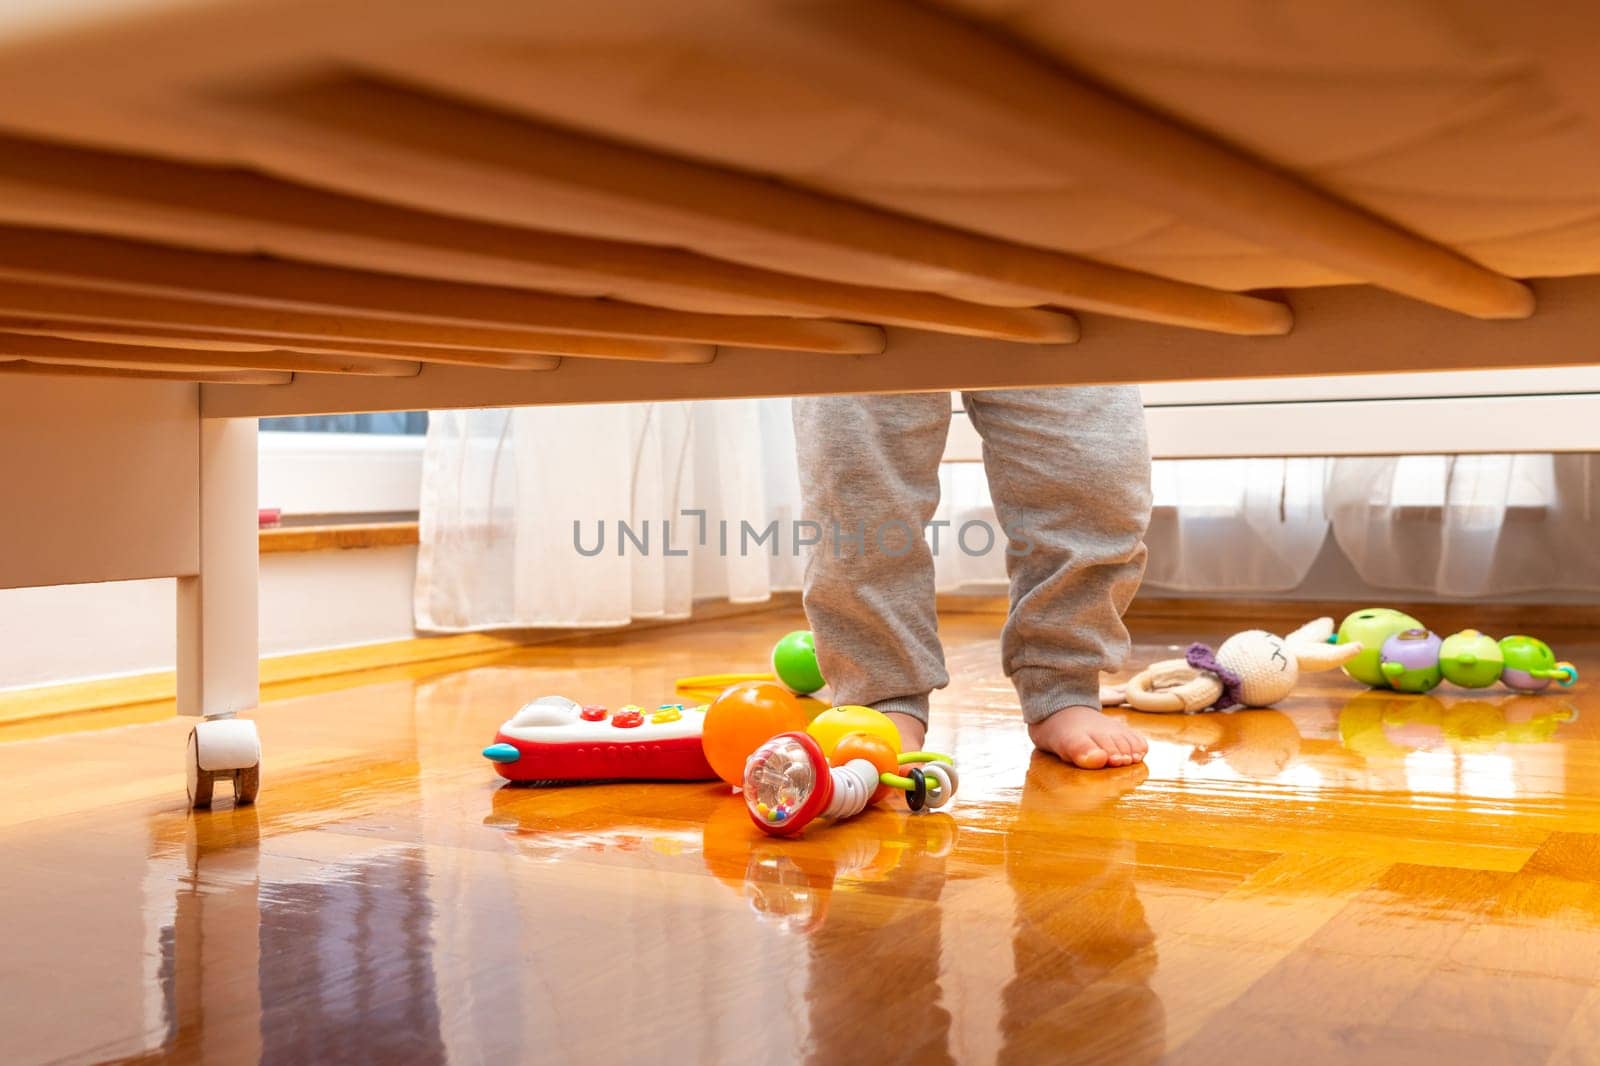 Baby standing near a crib with toys on the floor. View from under the bed. The window brings in